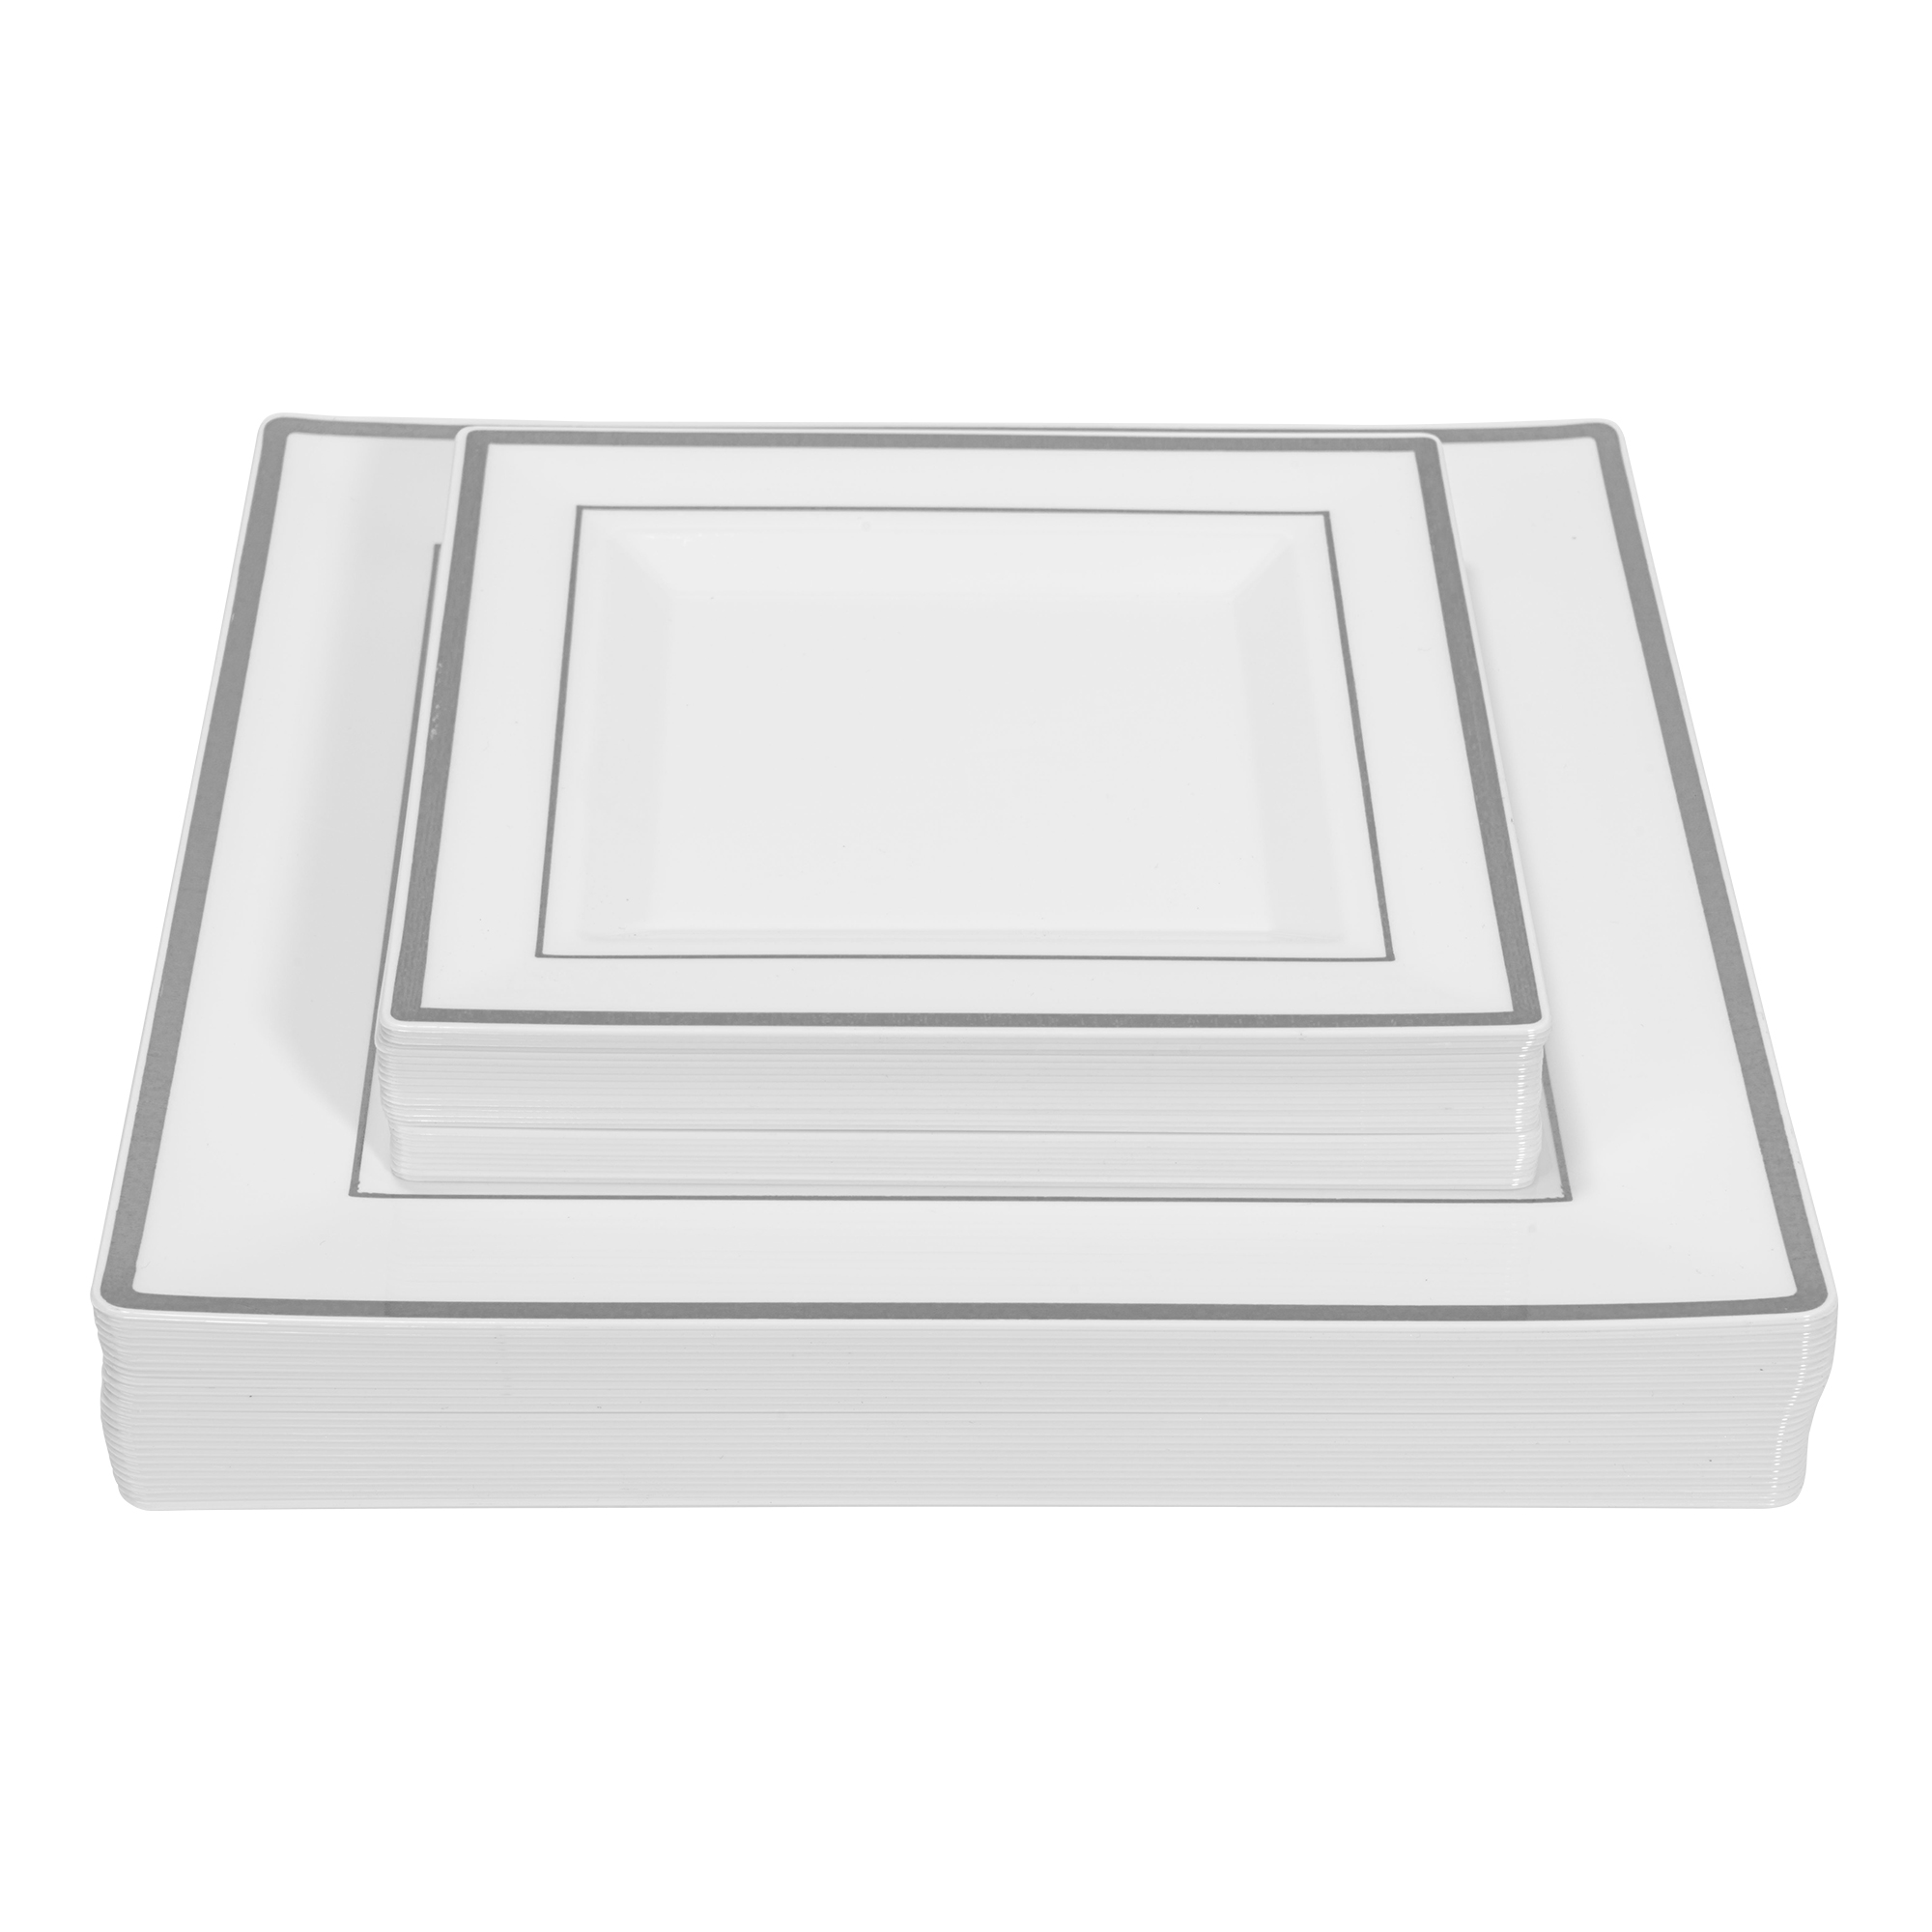 Deluxe Square Plate Set 50pc/set - Silver